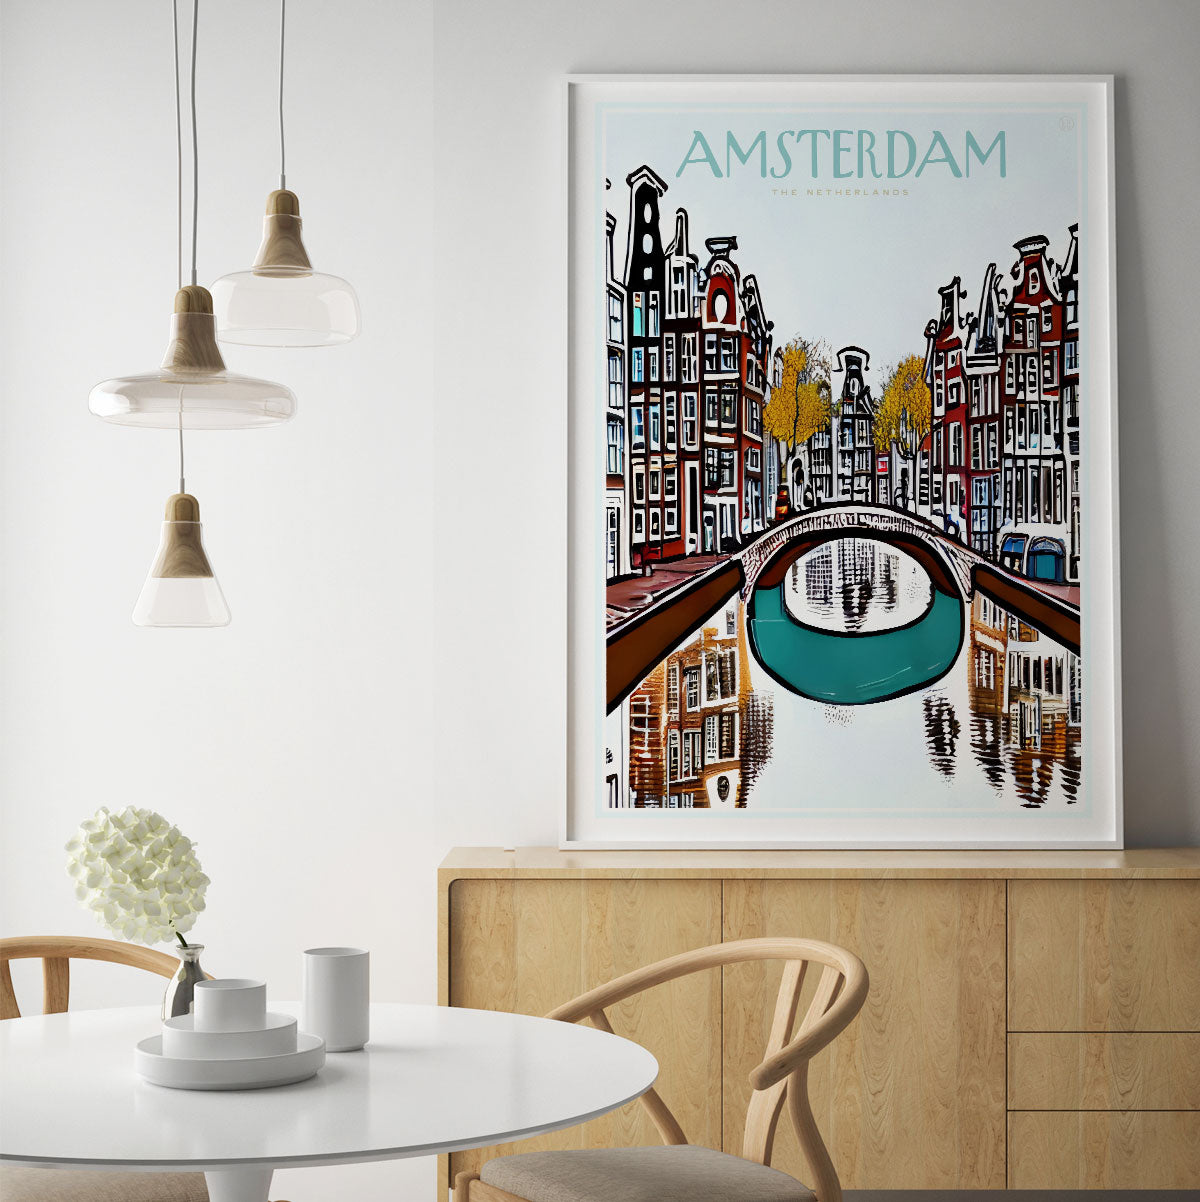 Amsterdam the Netherlands retro vintage poster print from Places We Luv